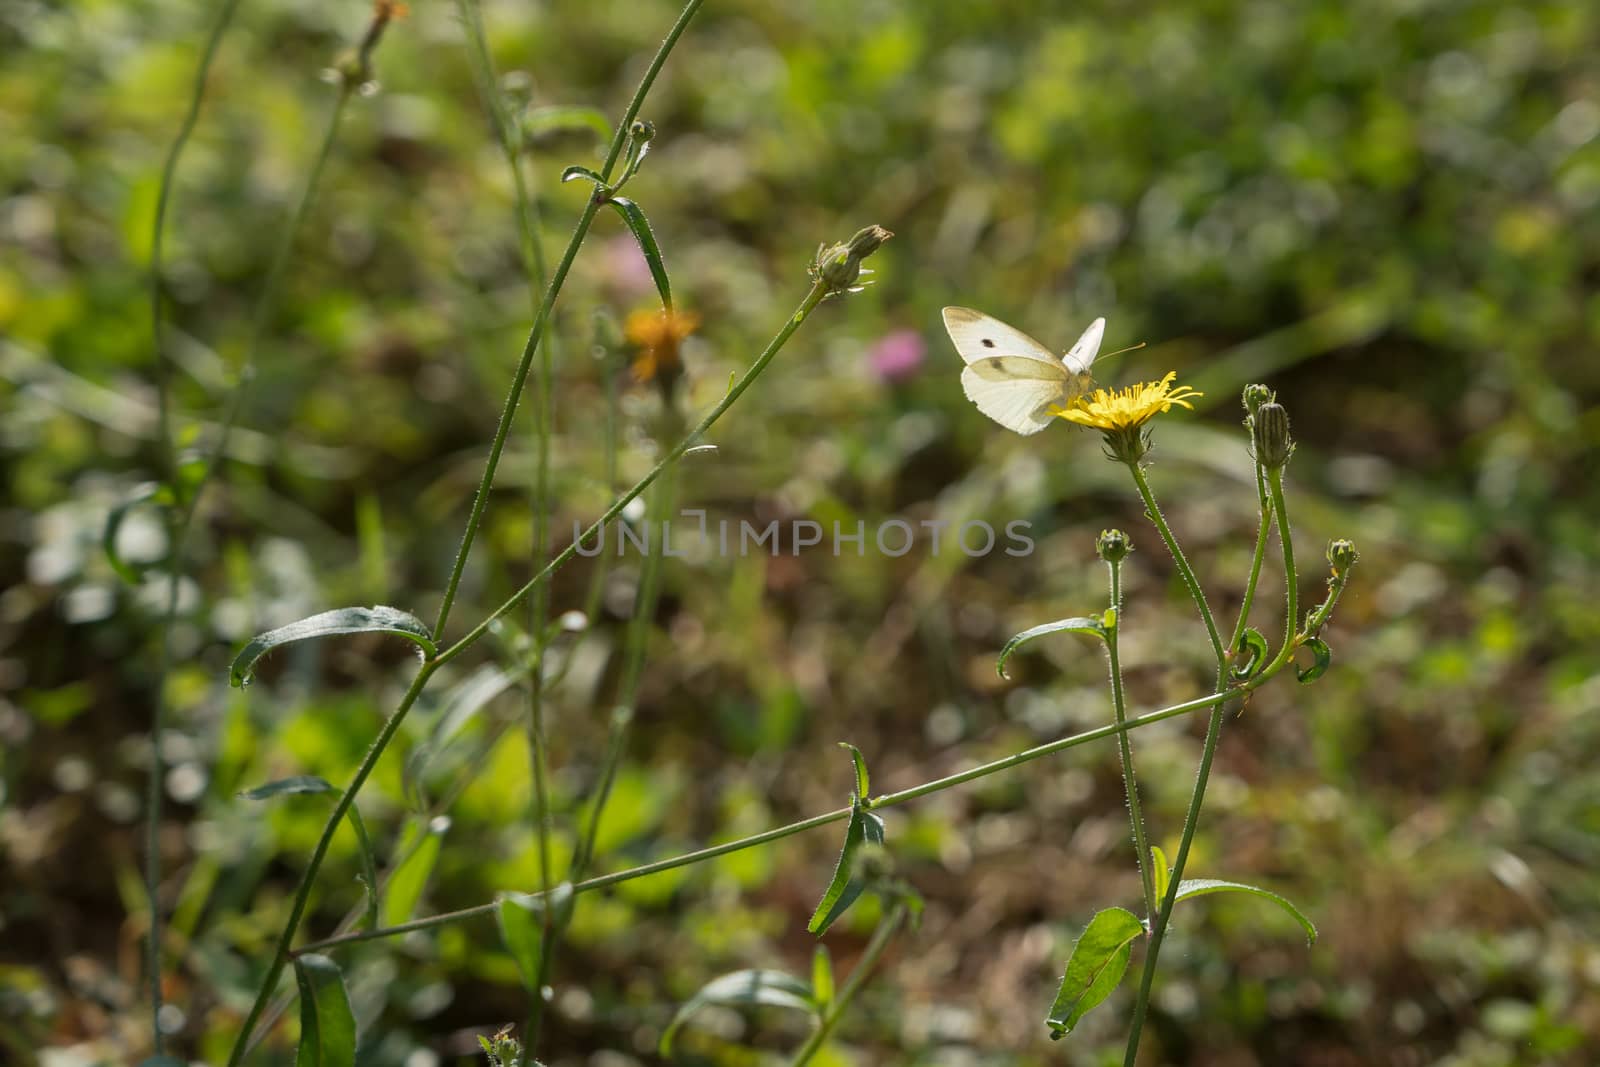 Southern Small White
(pieris mannii) Butterfly in Sigishoura Rom by phil_bird